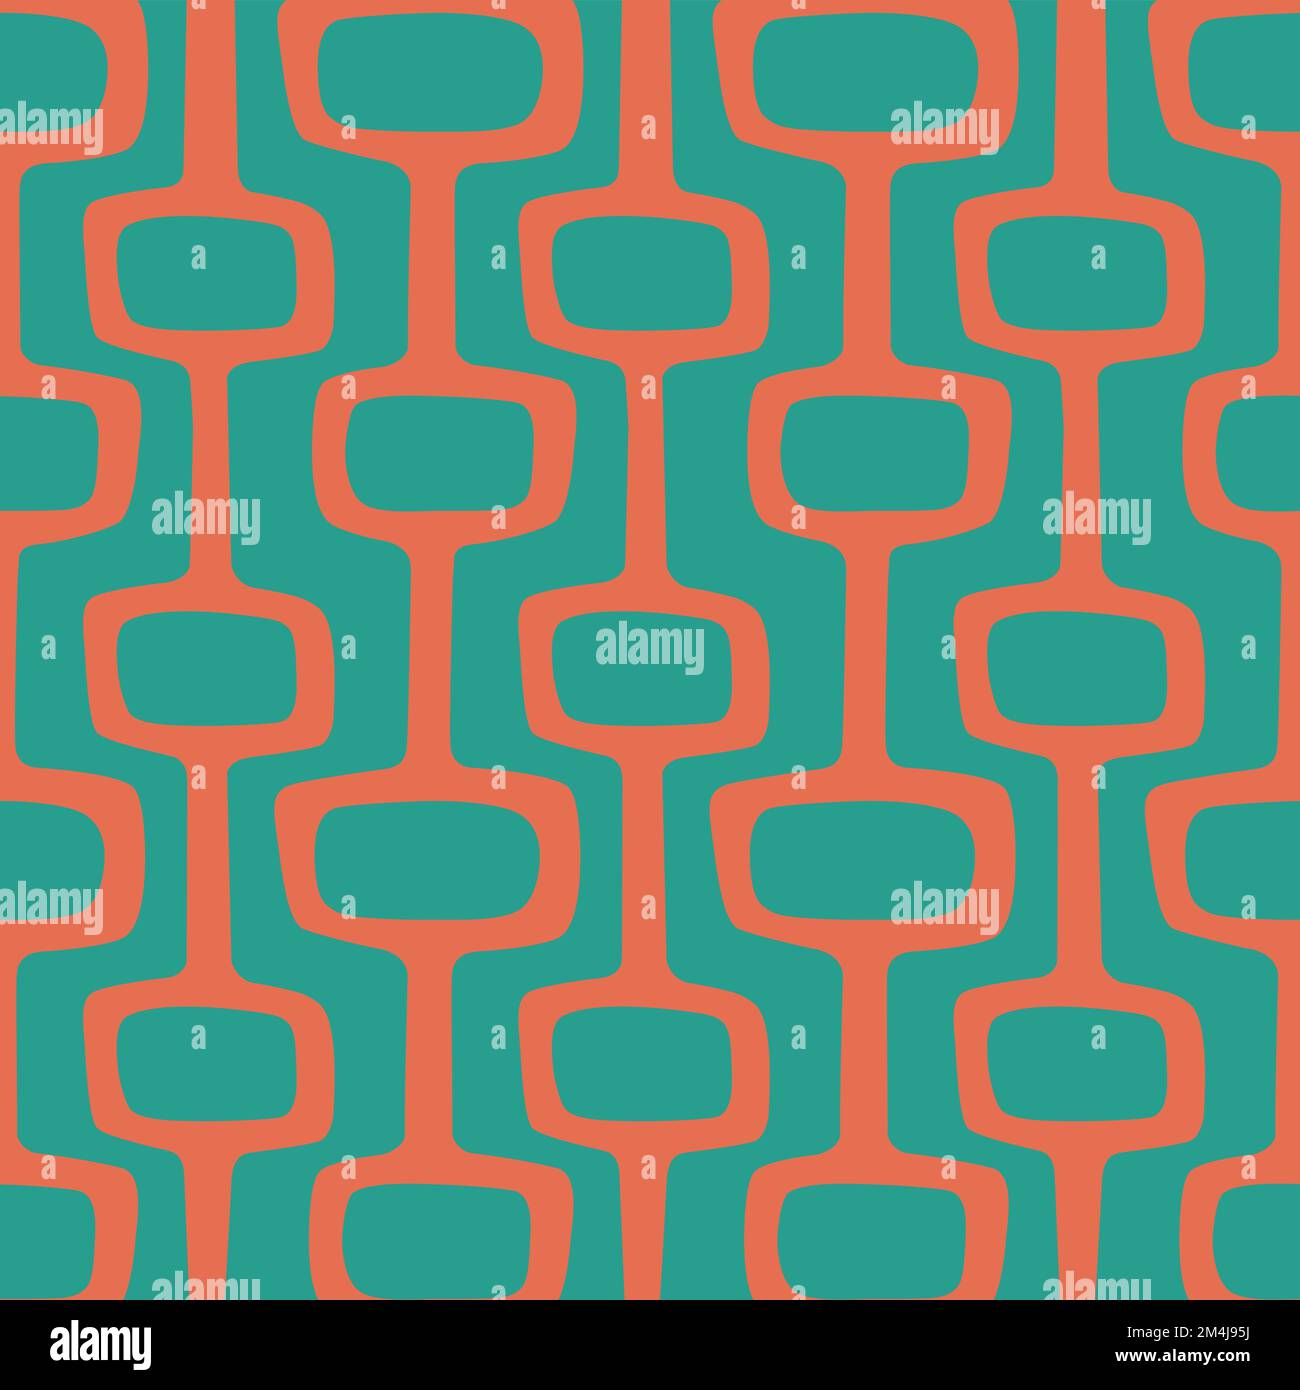 Mid-century modern atomic age background in teal and orange. Ideal for wallpaper and fabric design. Stock Vector